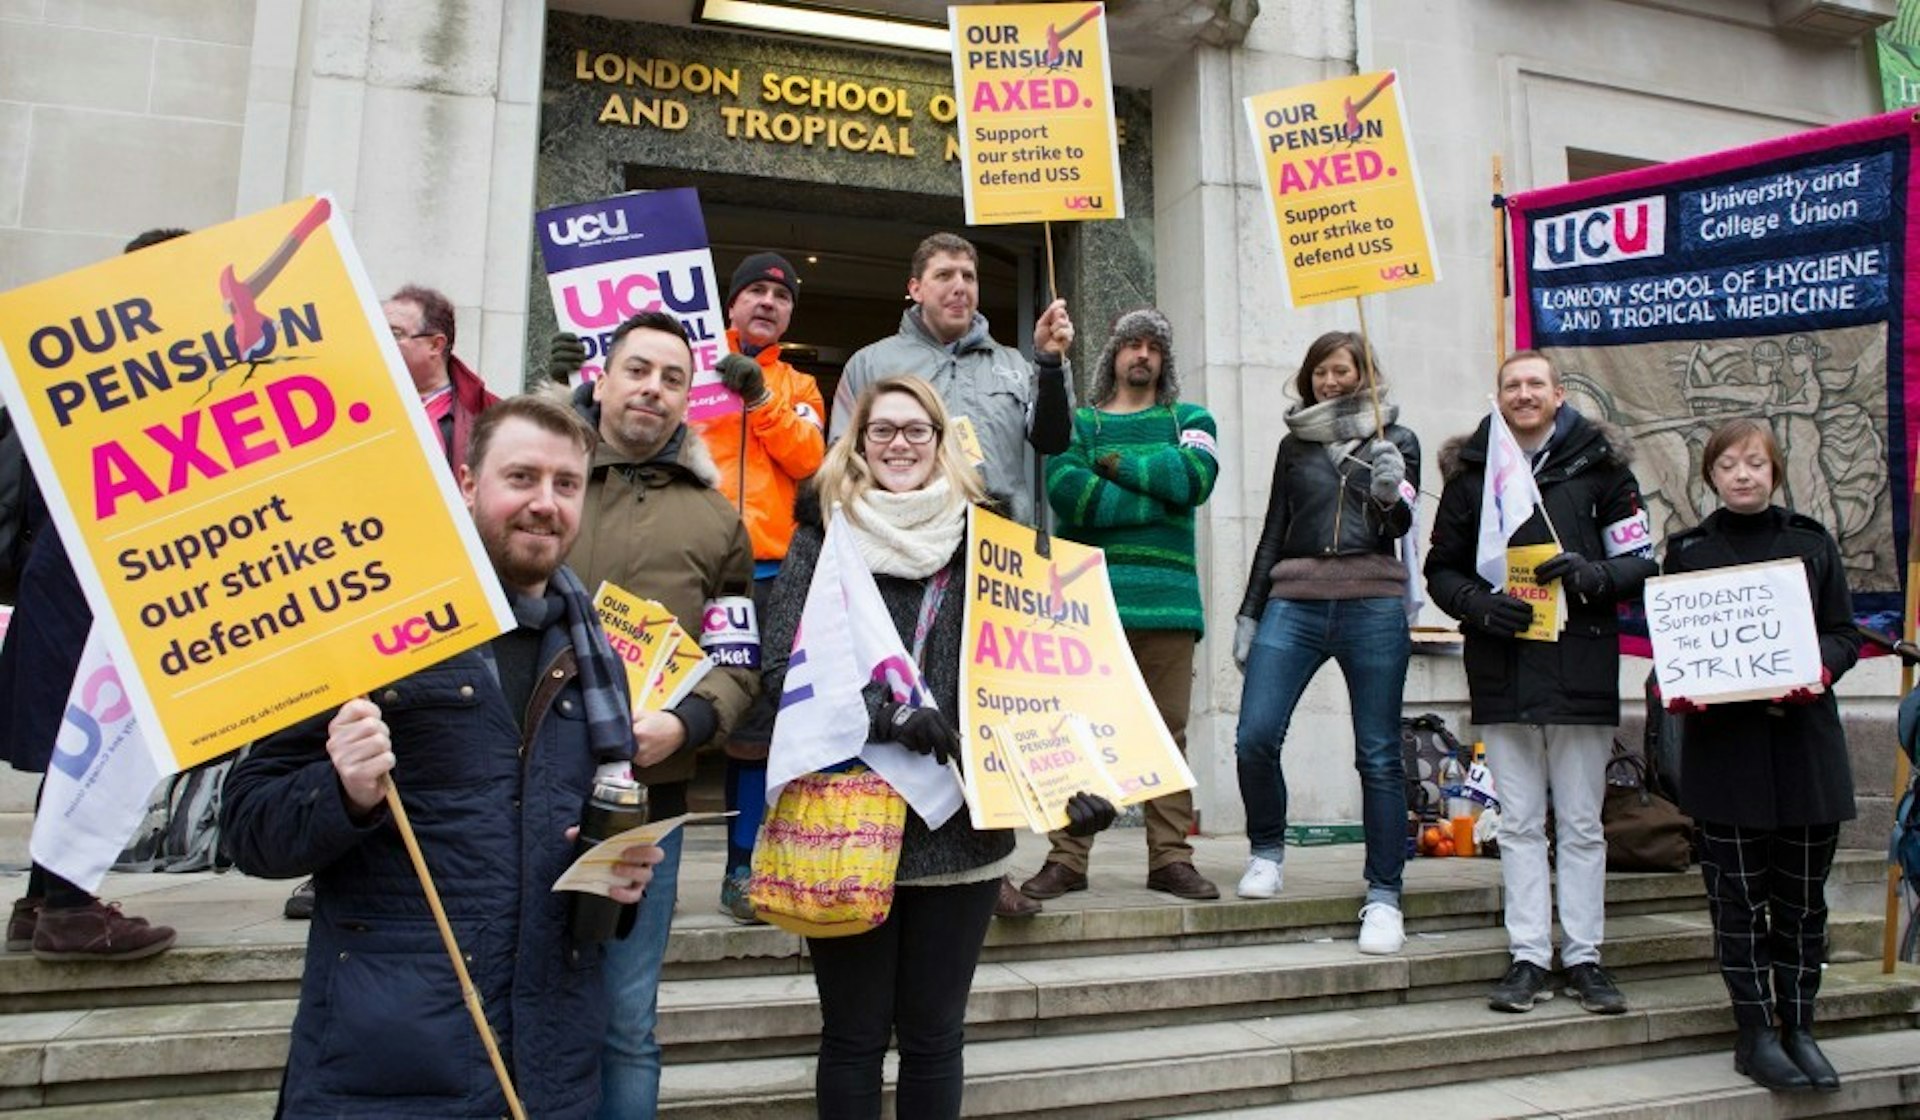 #NoCapitulation: Why the UK’s campus revolts will continue